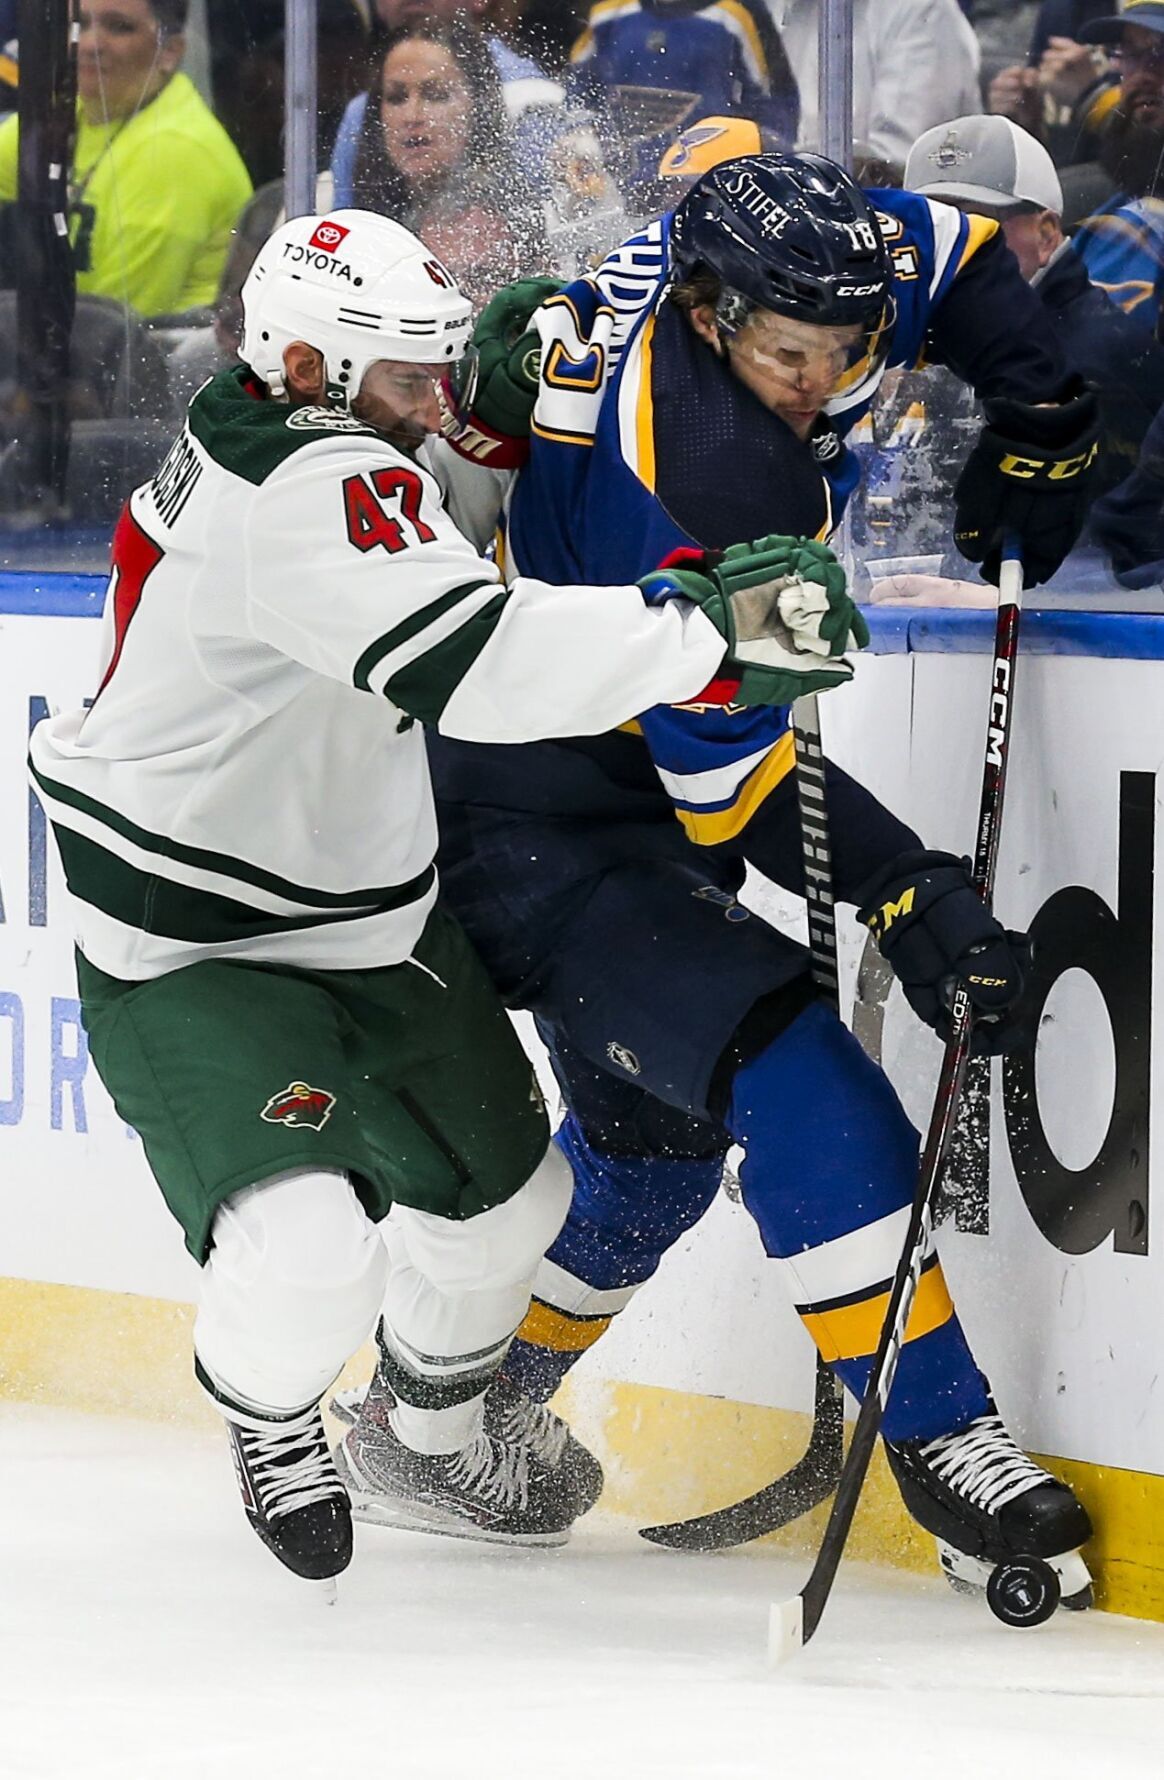 St. Louis Blues defense remains an enigma, how might it be solved?